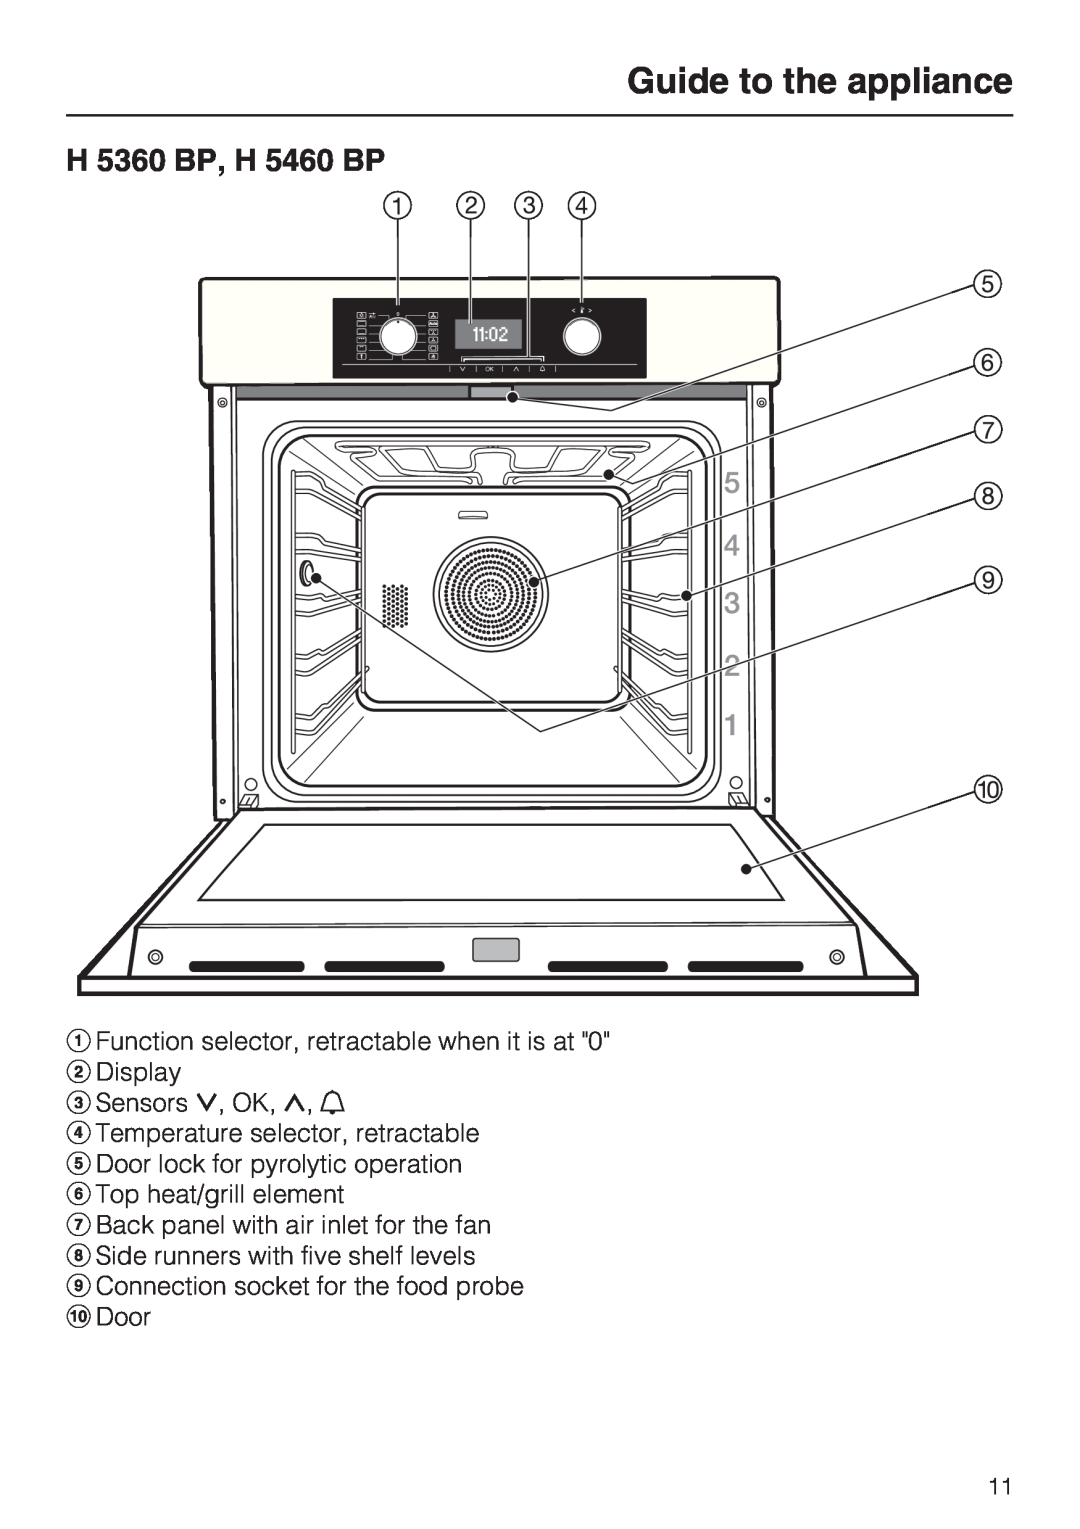 Miele H 5460-BP installation instructions Guide to the appliance, H 5360 BP, H 5460 BP 